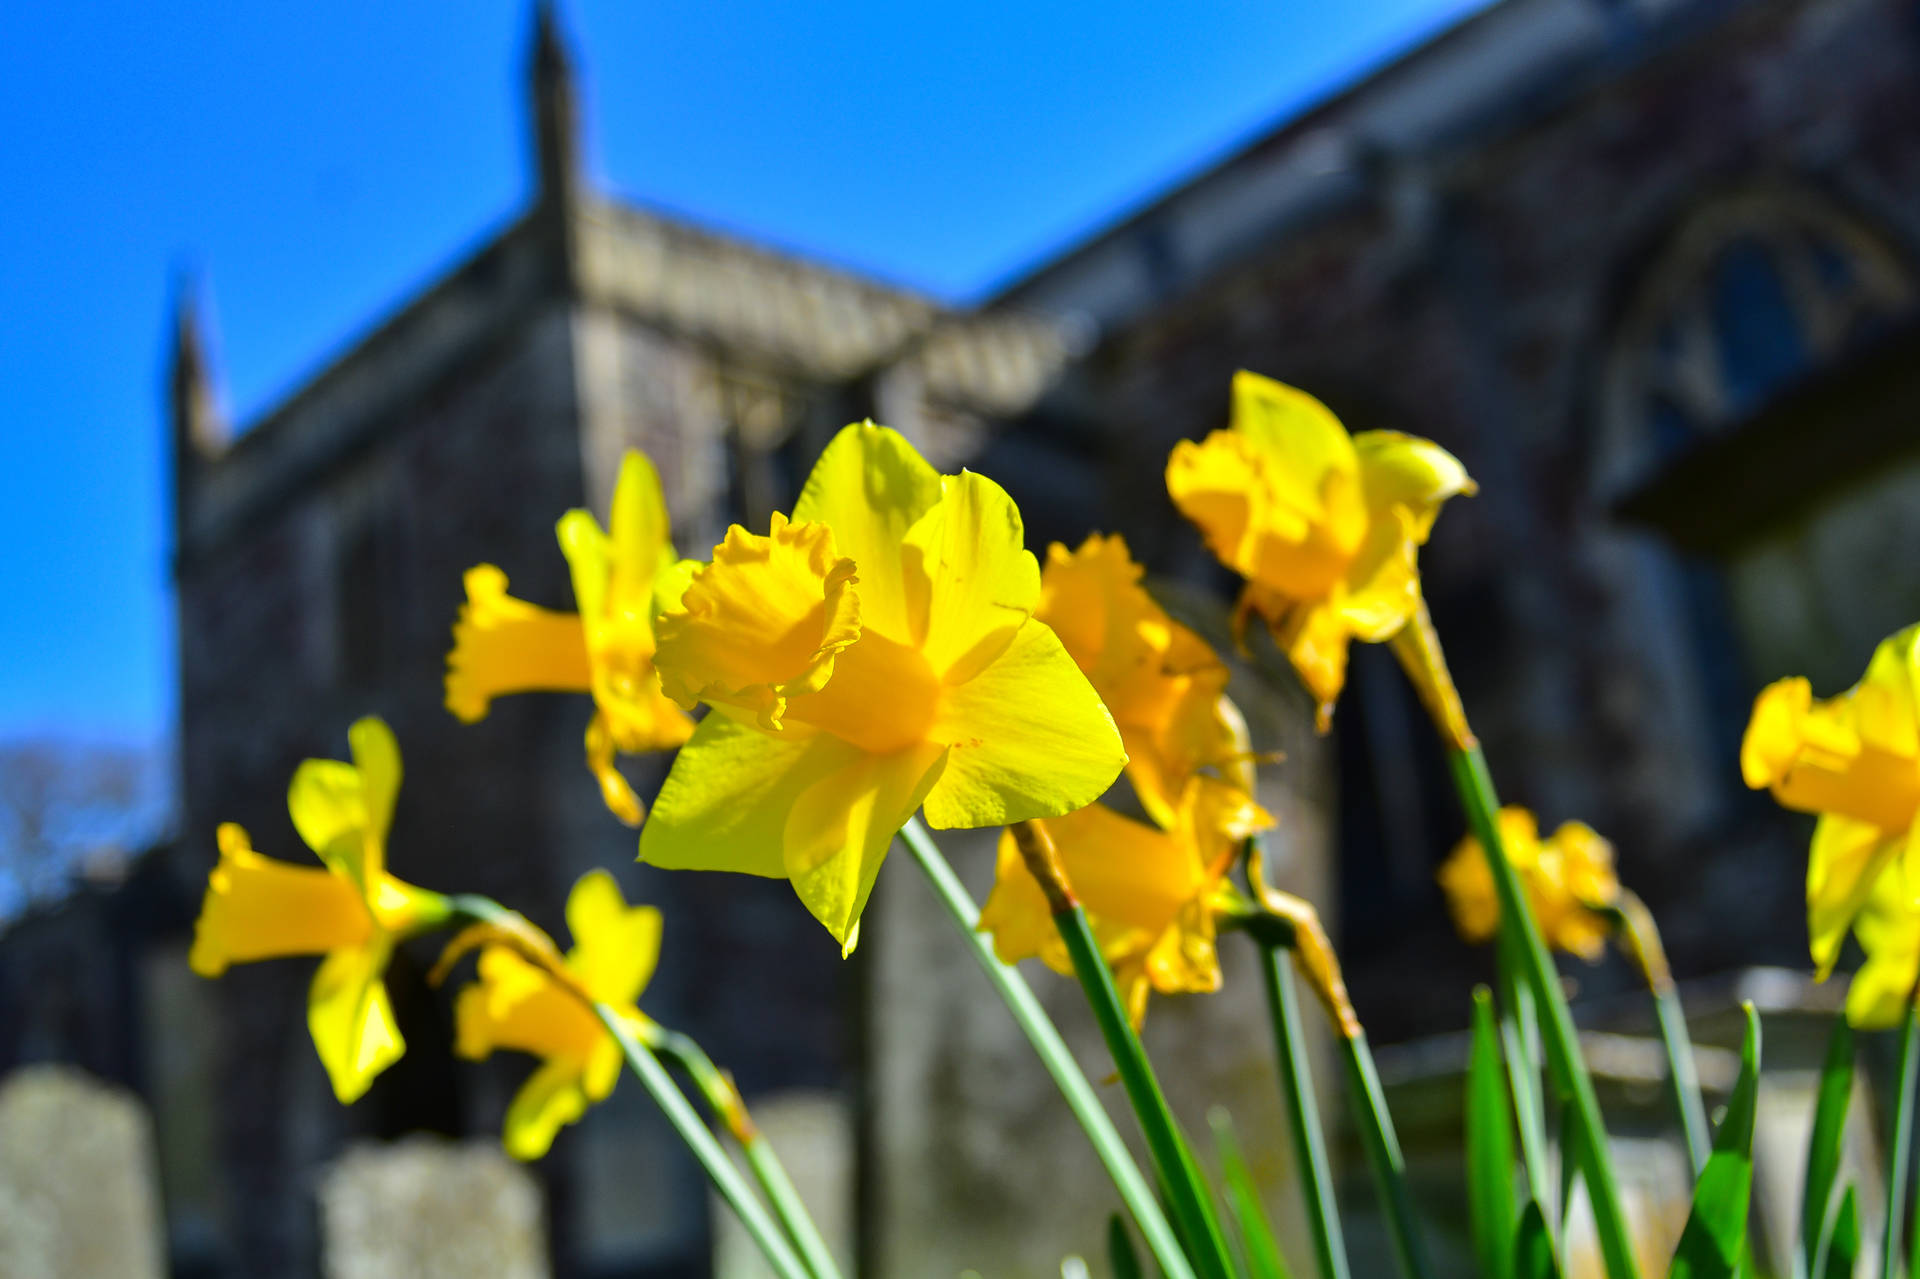 Daffodils At Blurred Castle Wall